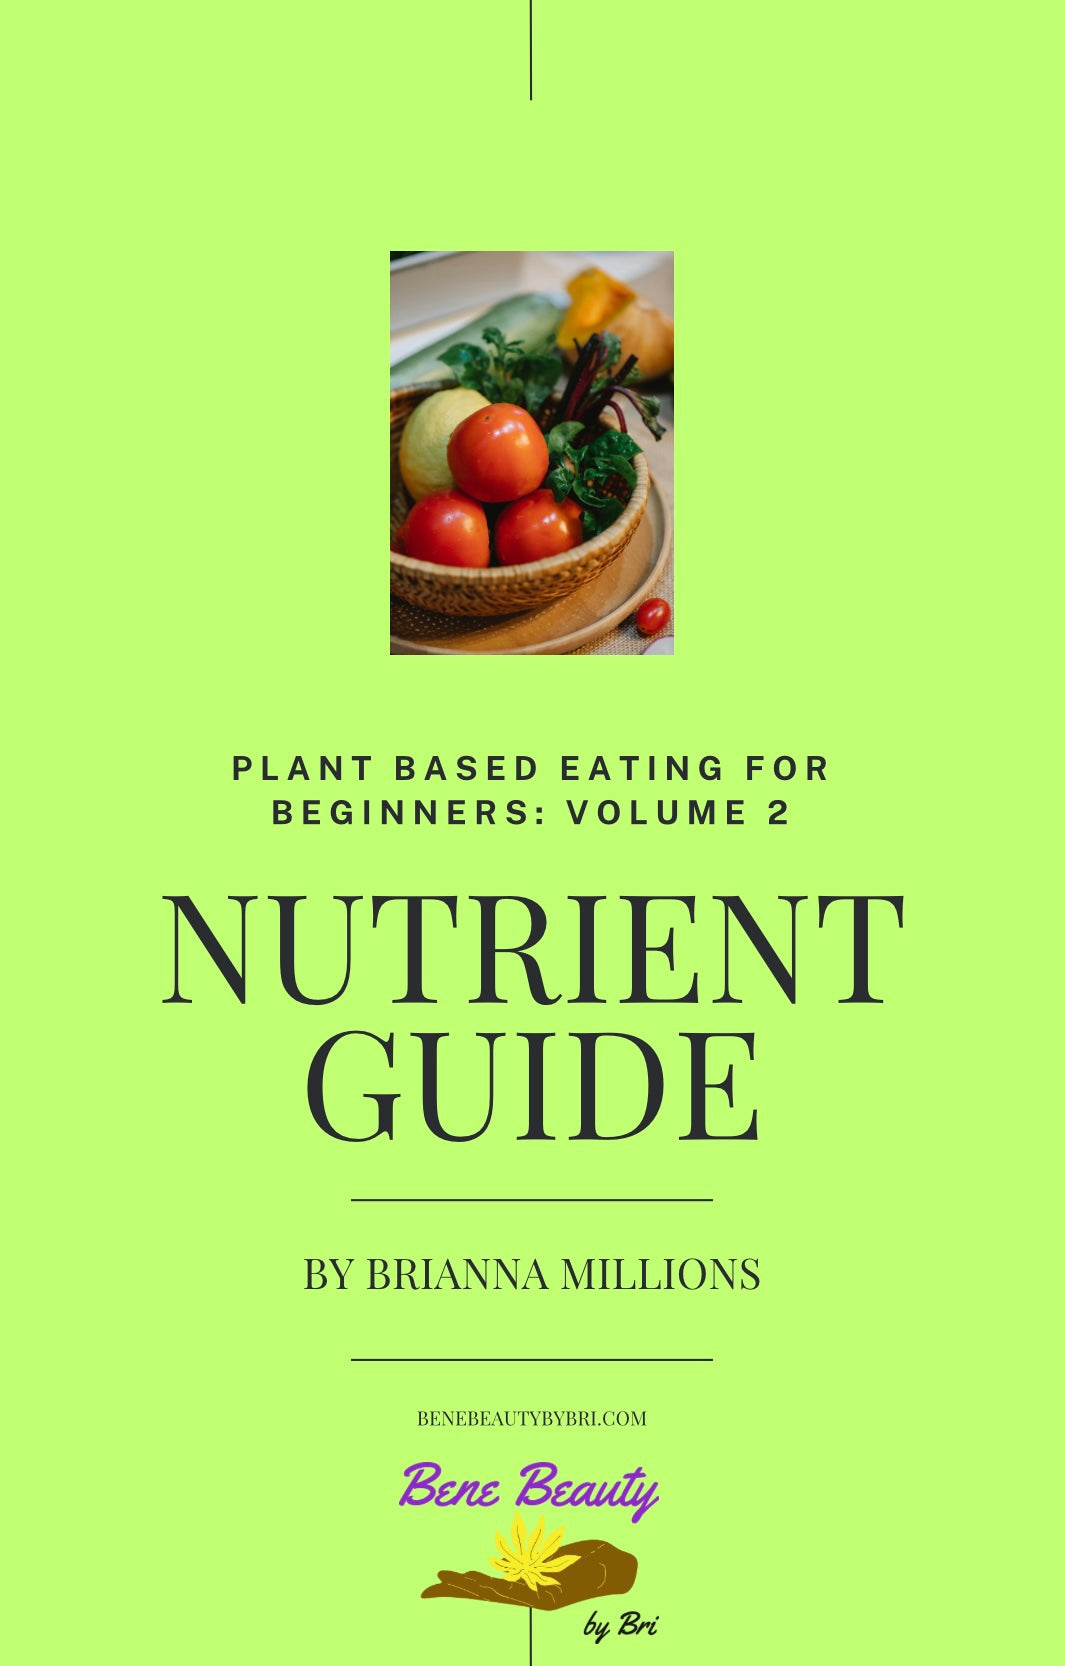 Plant-Based Nutrient Guide E-Book